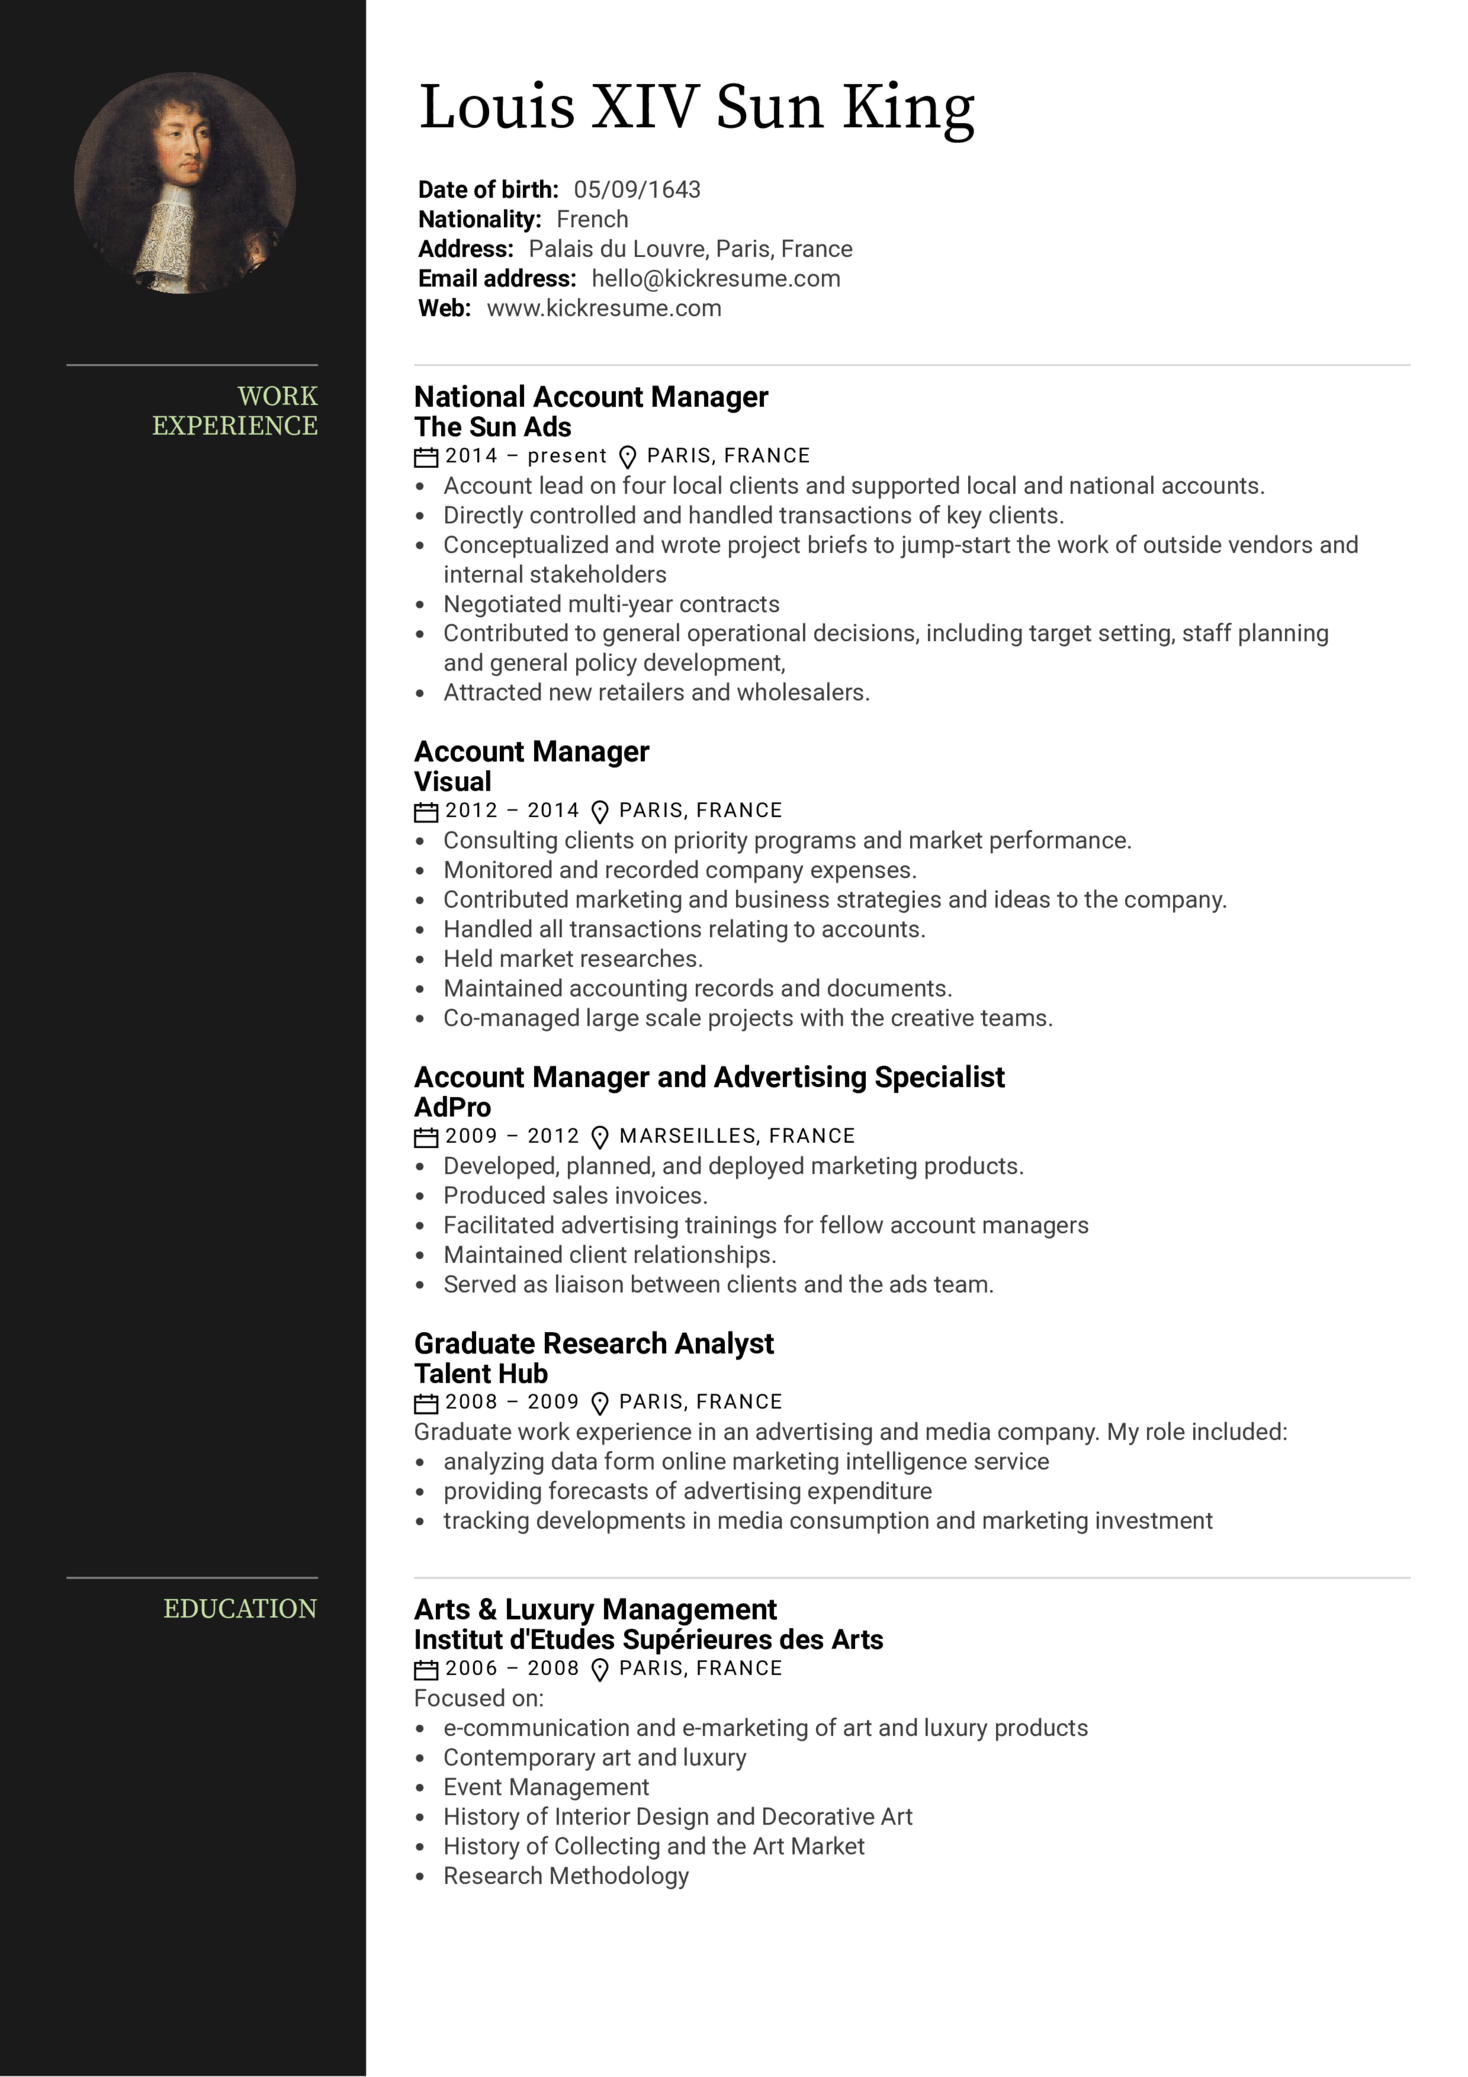 Advertising Account Manager Resume Sample  Kickresume For National Account Manager Job Description Template